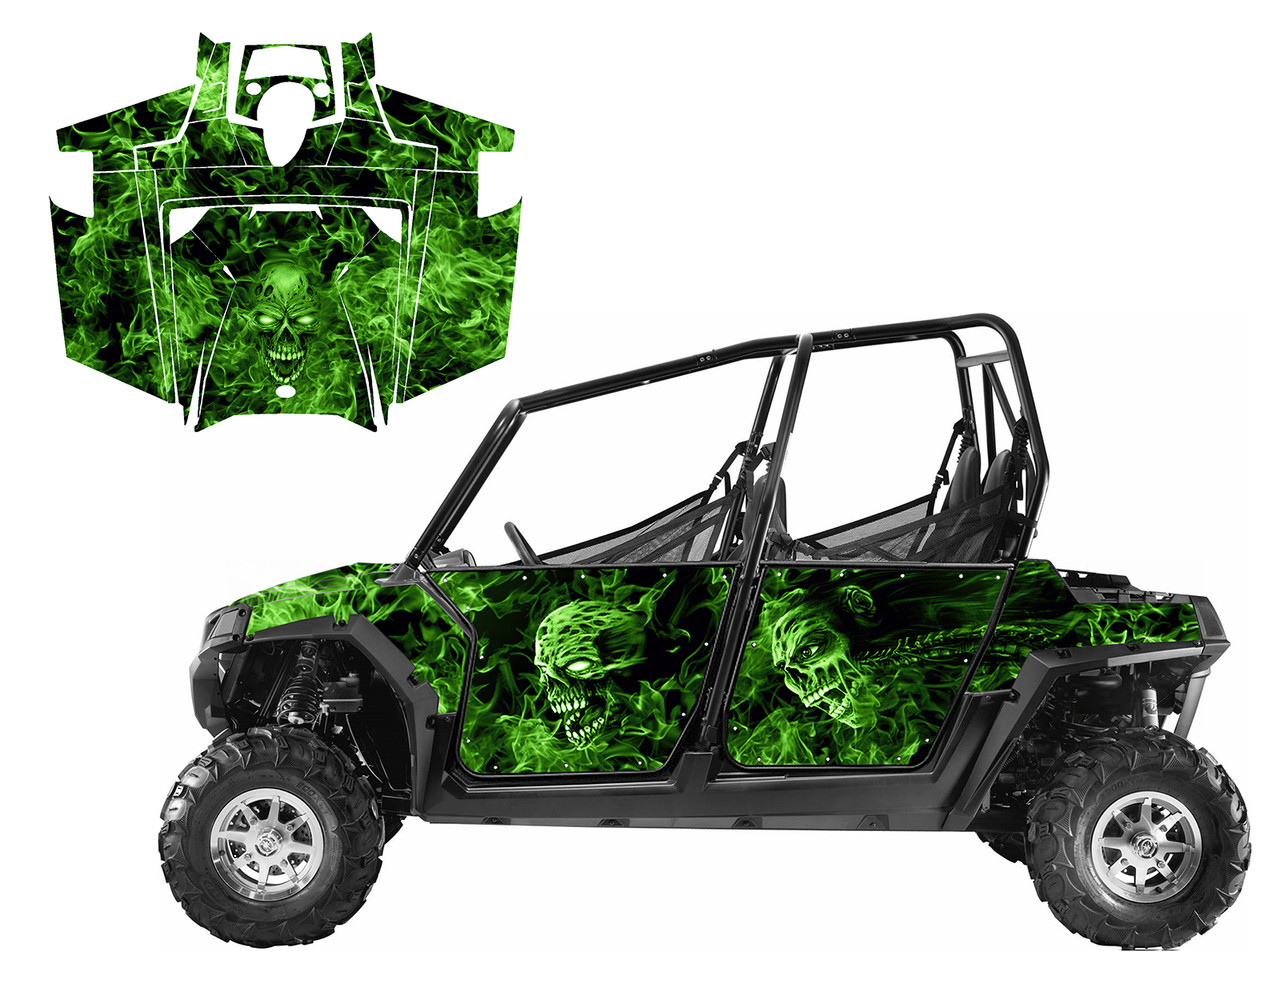 RZR4-800 4-SEATER 2011-2014 Design 9597 Zombies